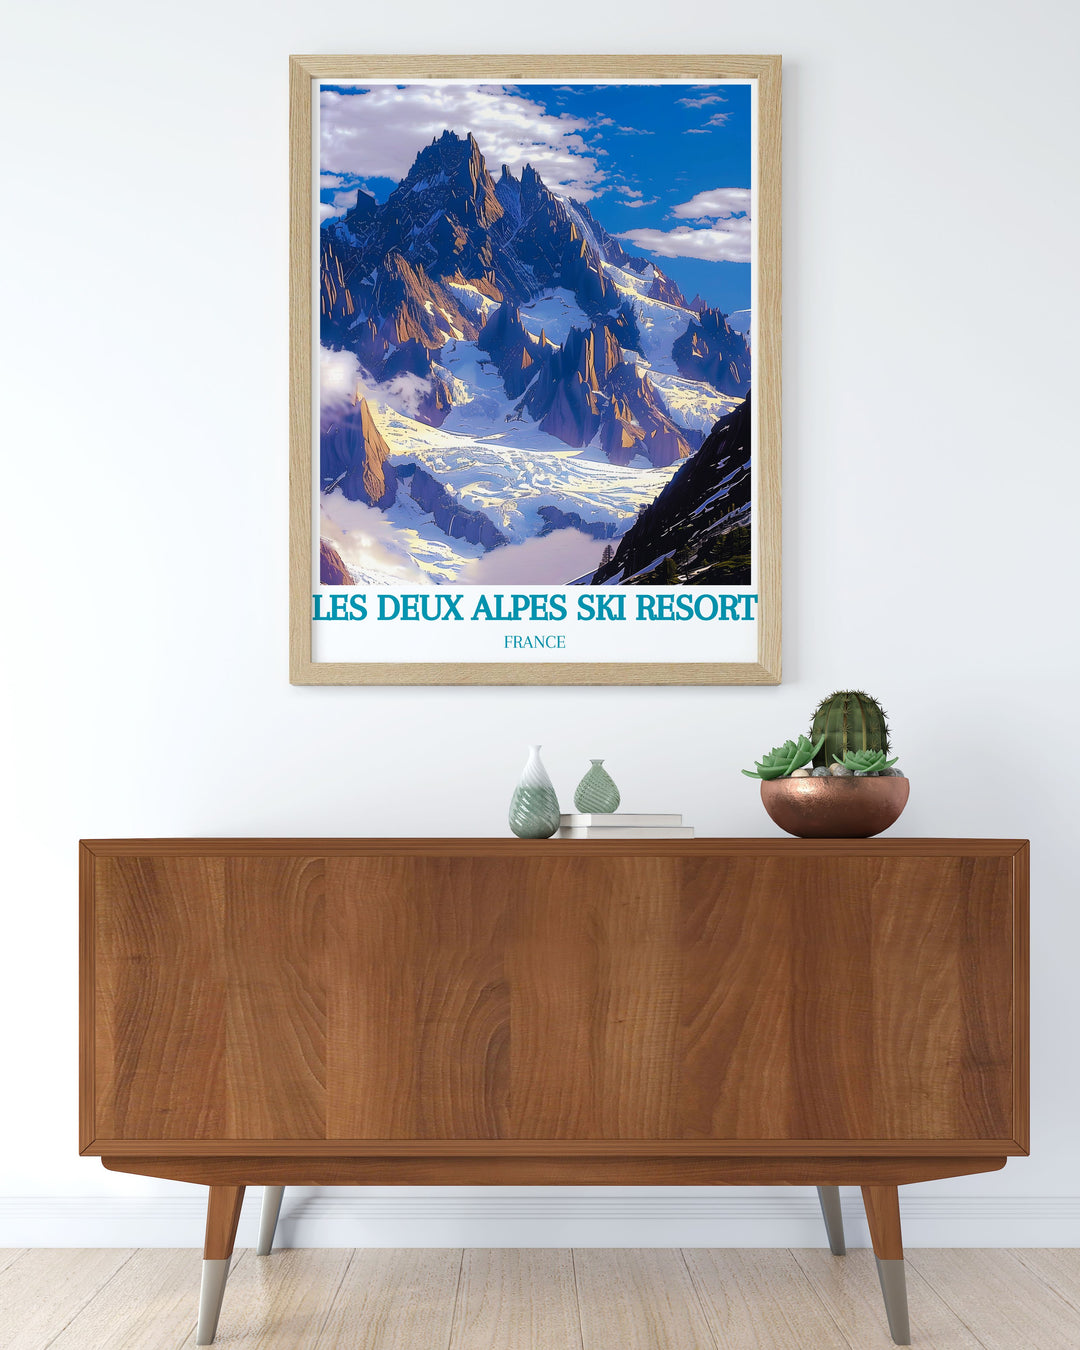 This vibrant art print of Les Deux Alpes Ski Resort features the bustling ski village and pristine snow covered slopes, making it a standout piece for those who love winter sports and alpine scenery.